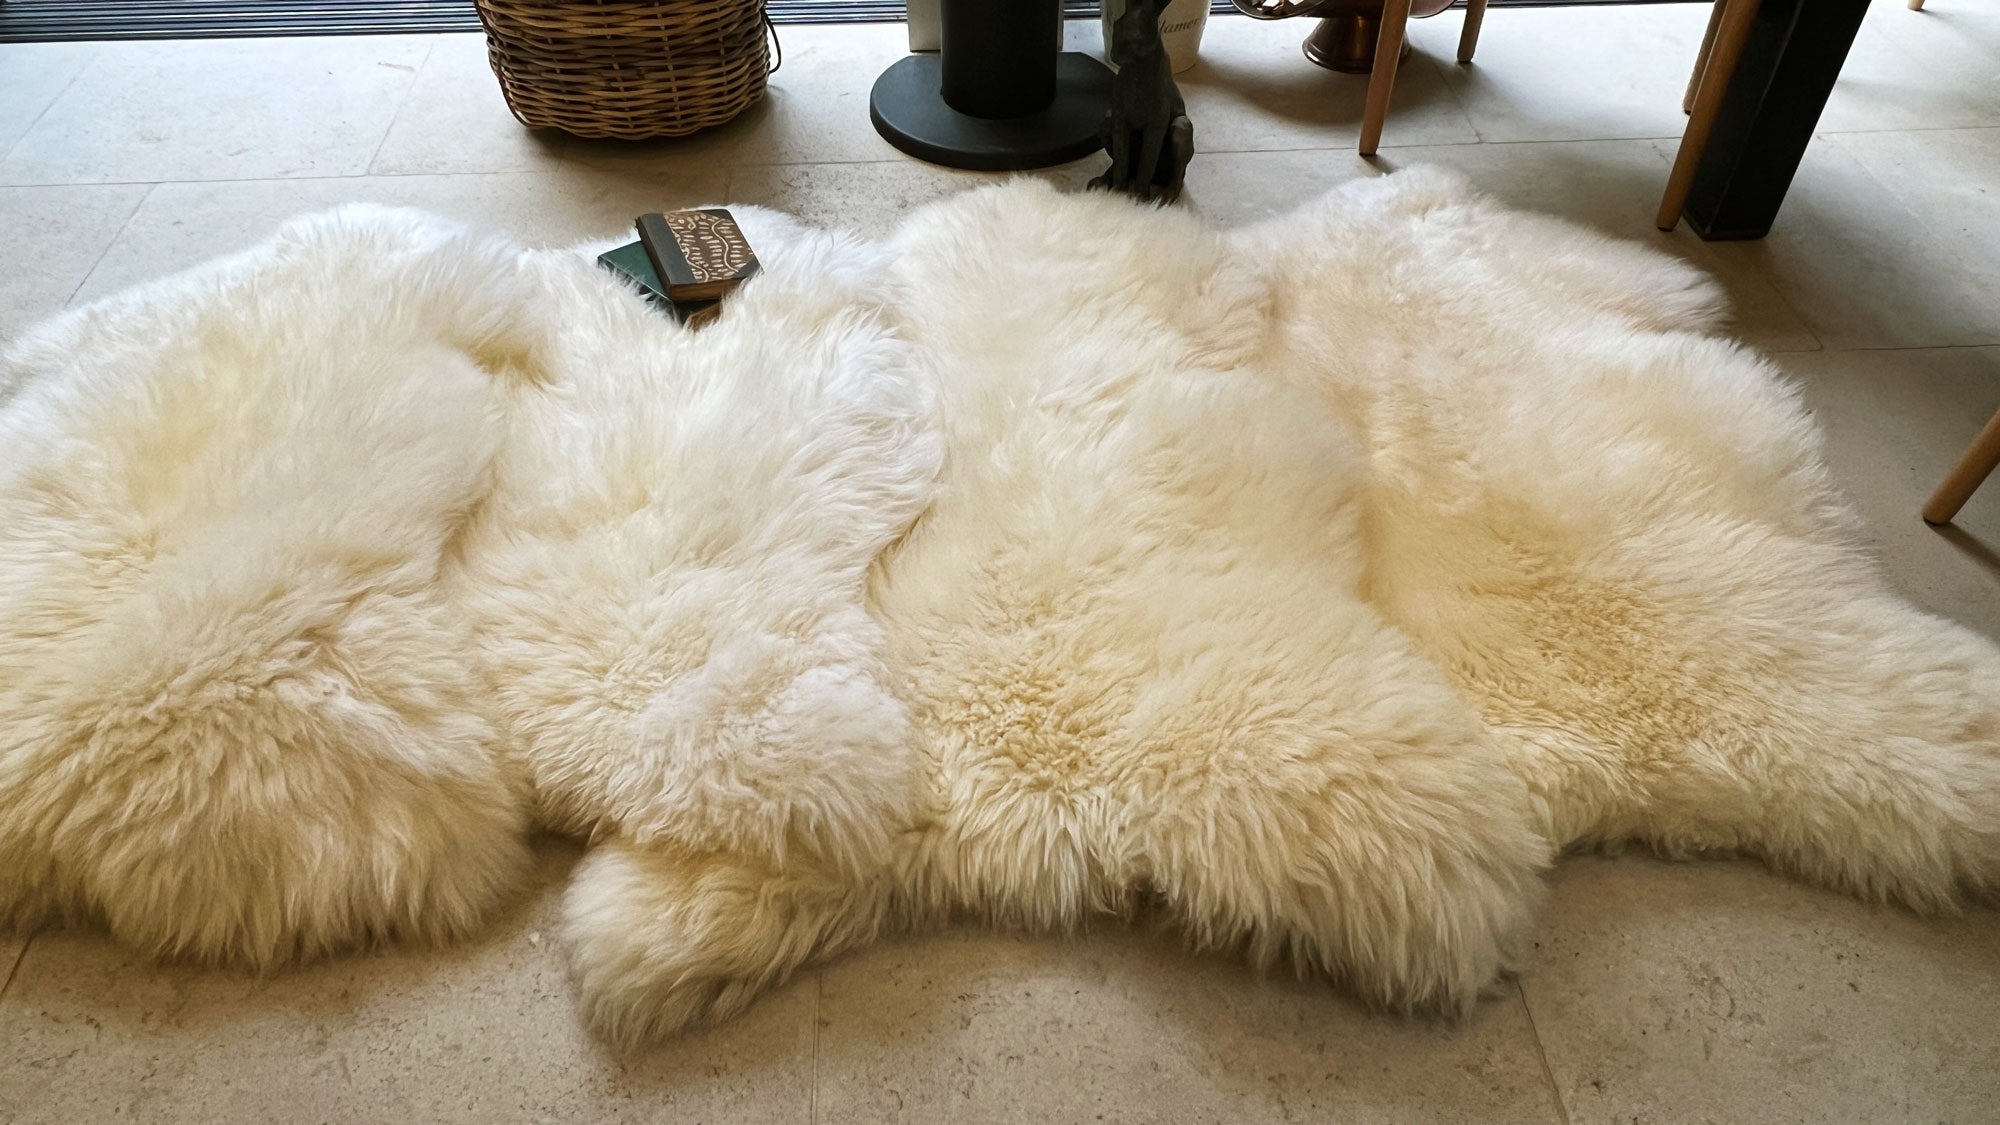 Load video: Give your home a hygge with Wildash sheepskin rugs